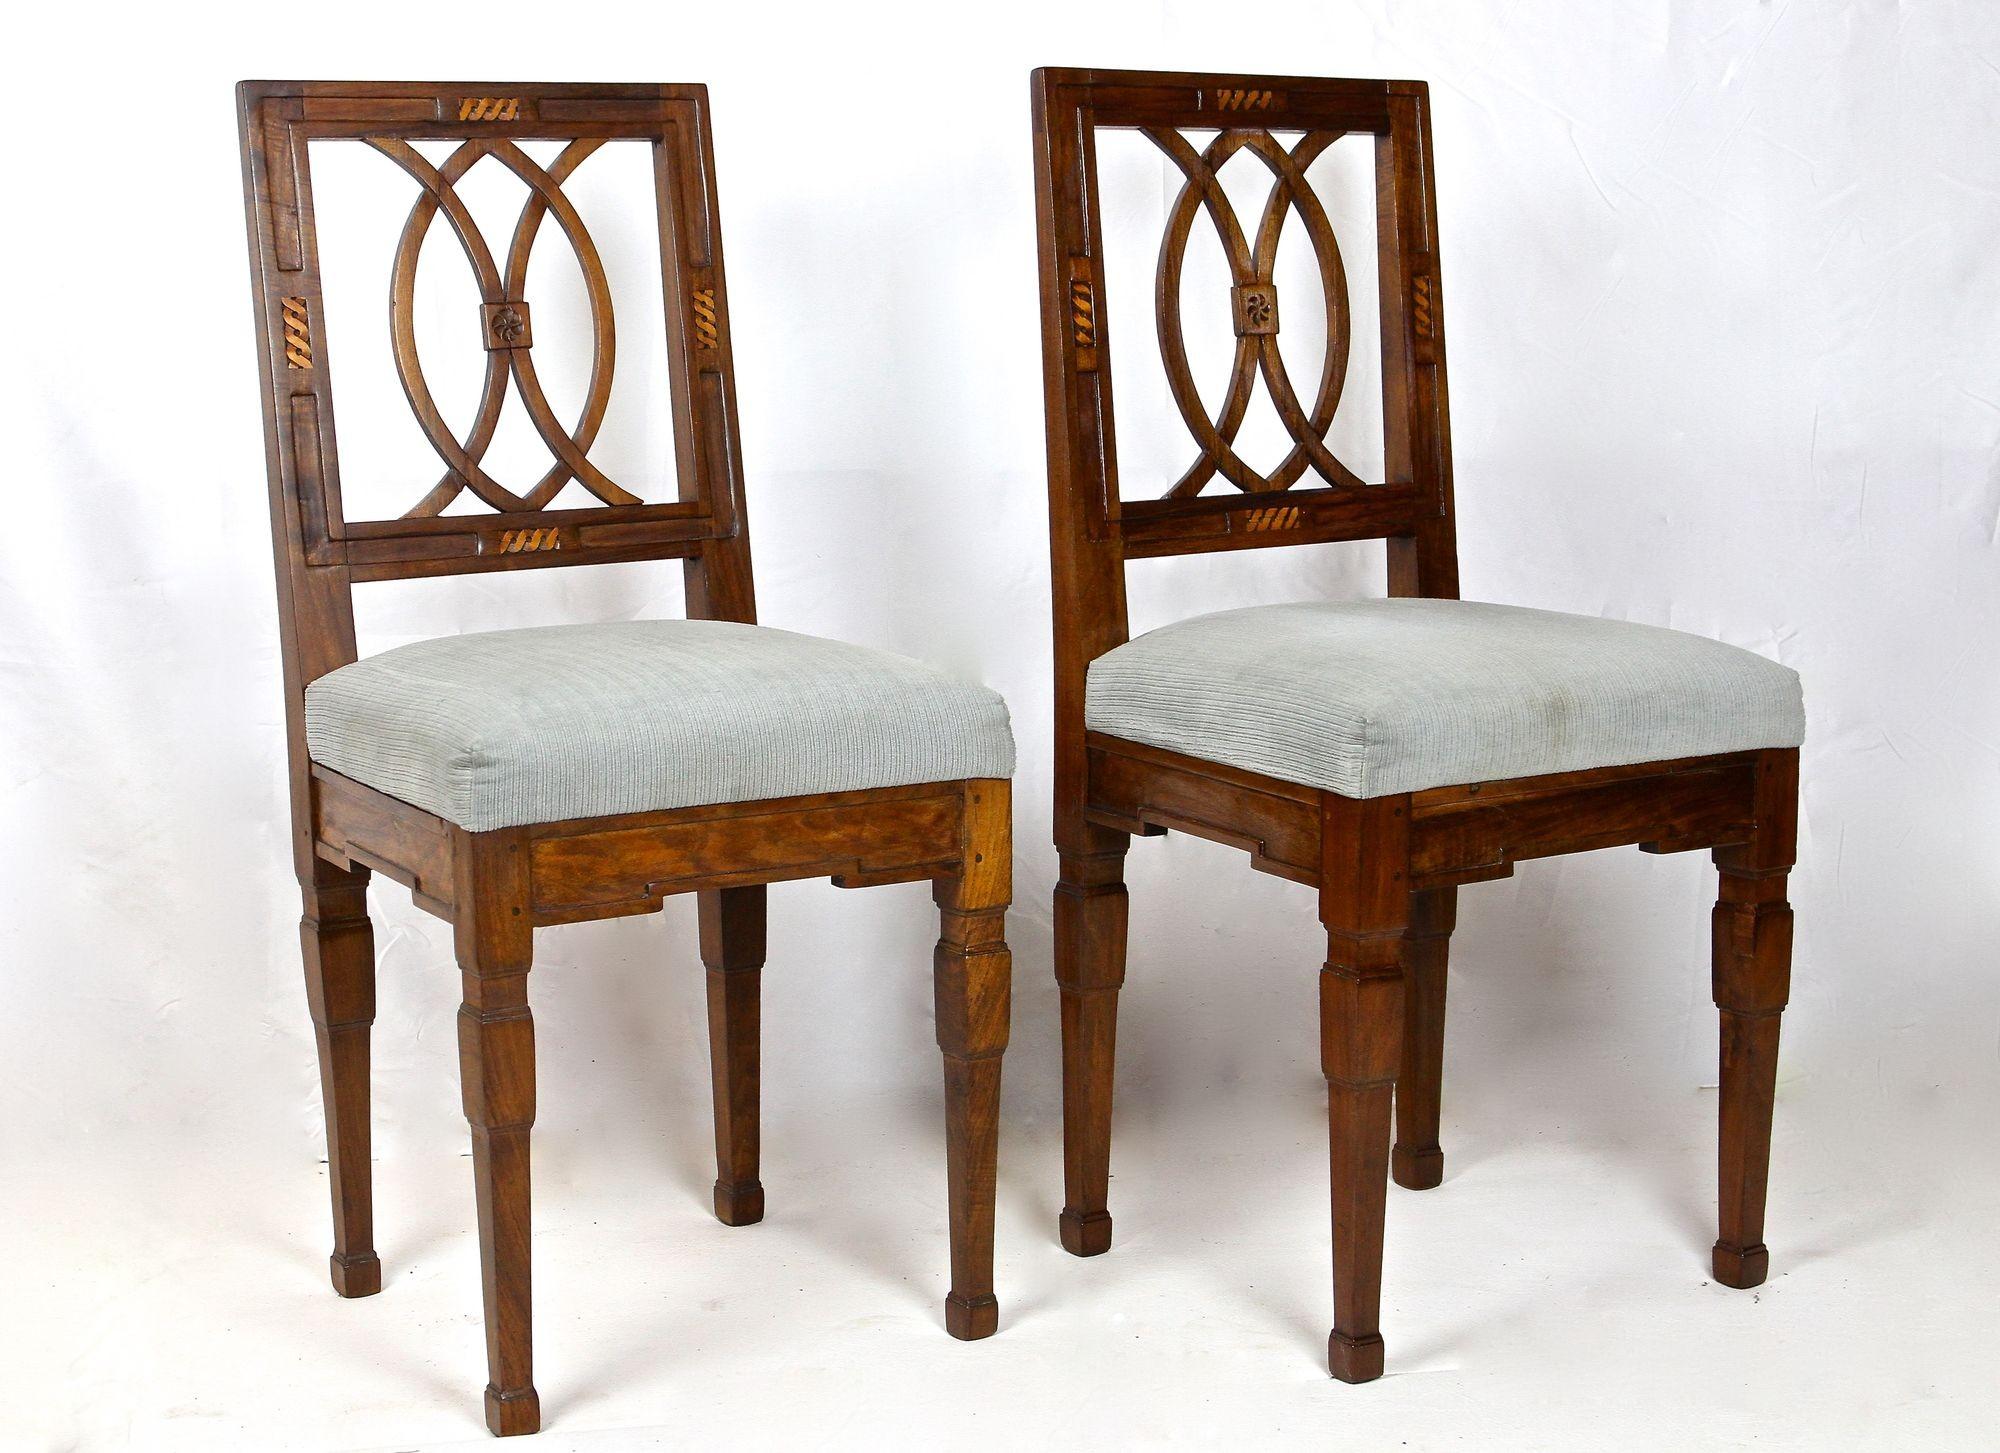 Remarkable pair of 18th century nutwood chairs from the so called 